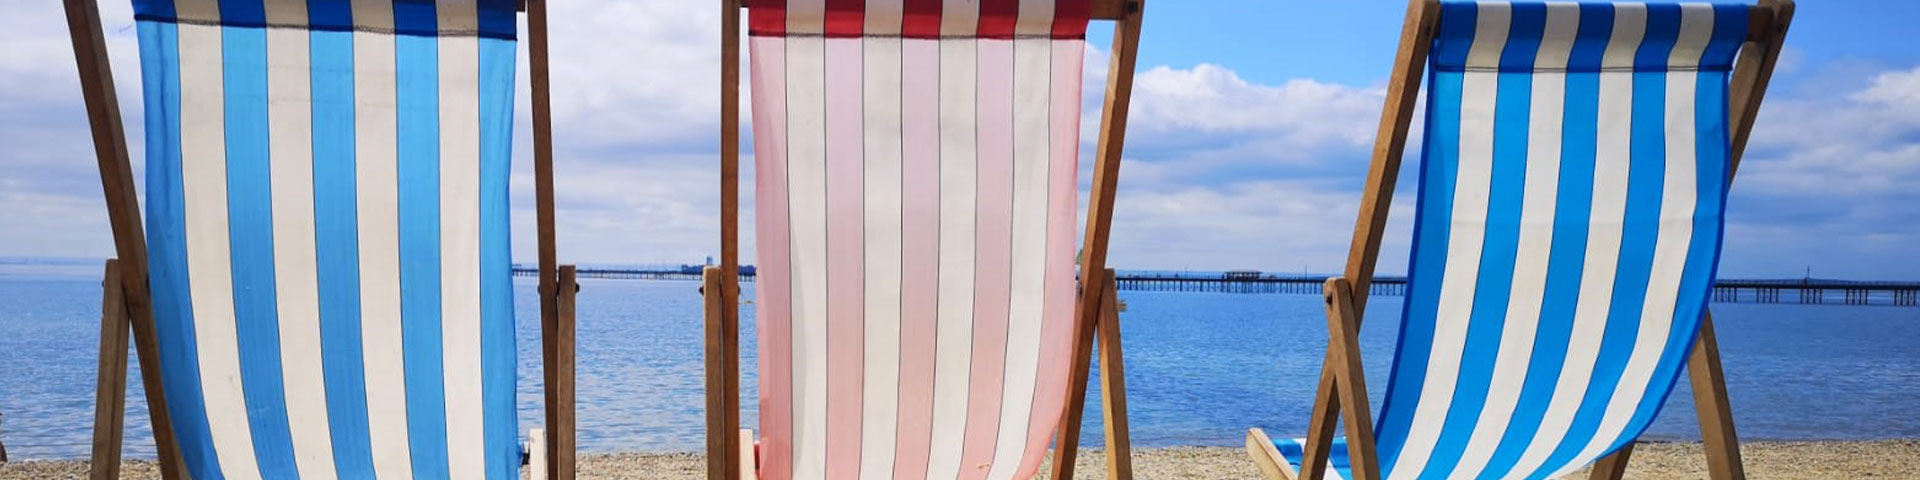 Blue and red deckchairs in a line on a beach